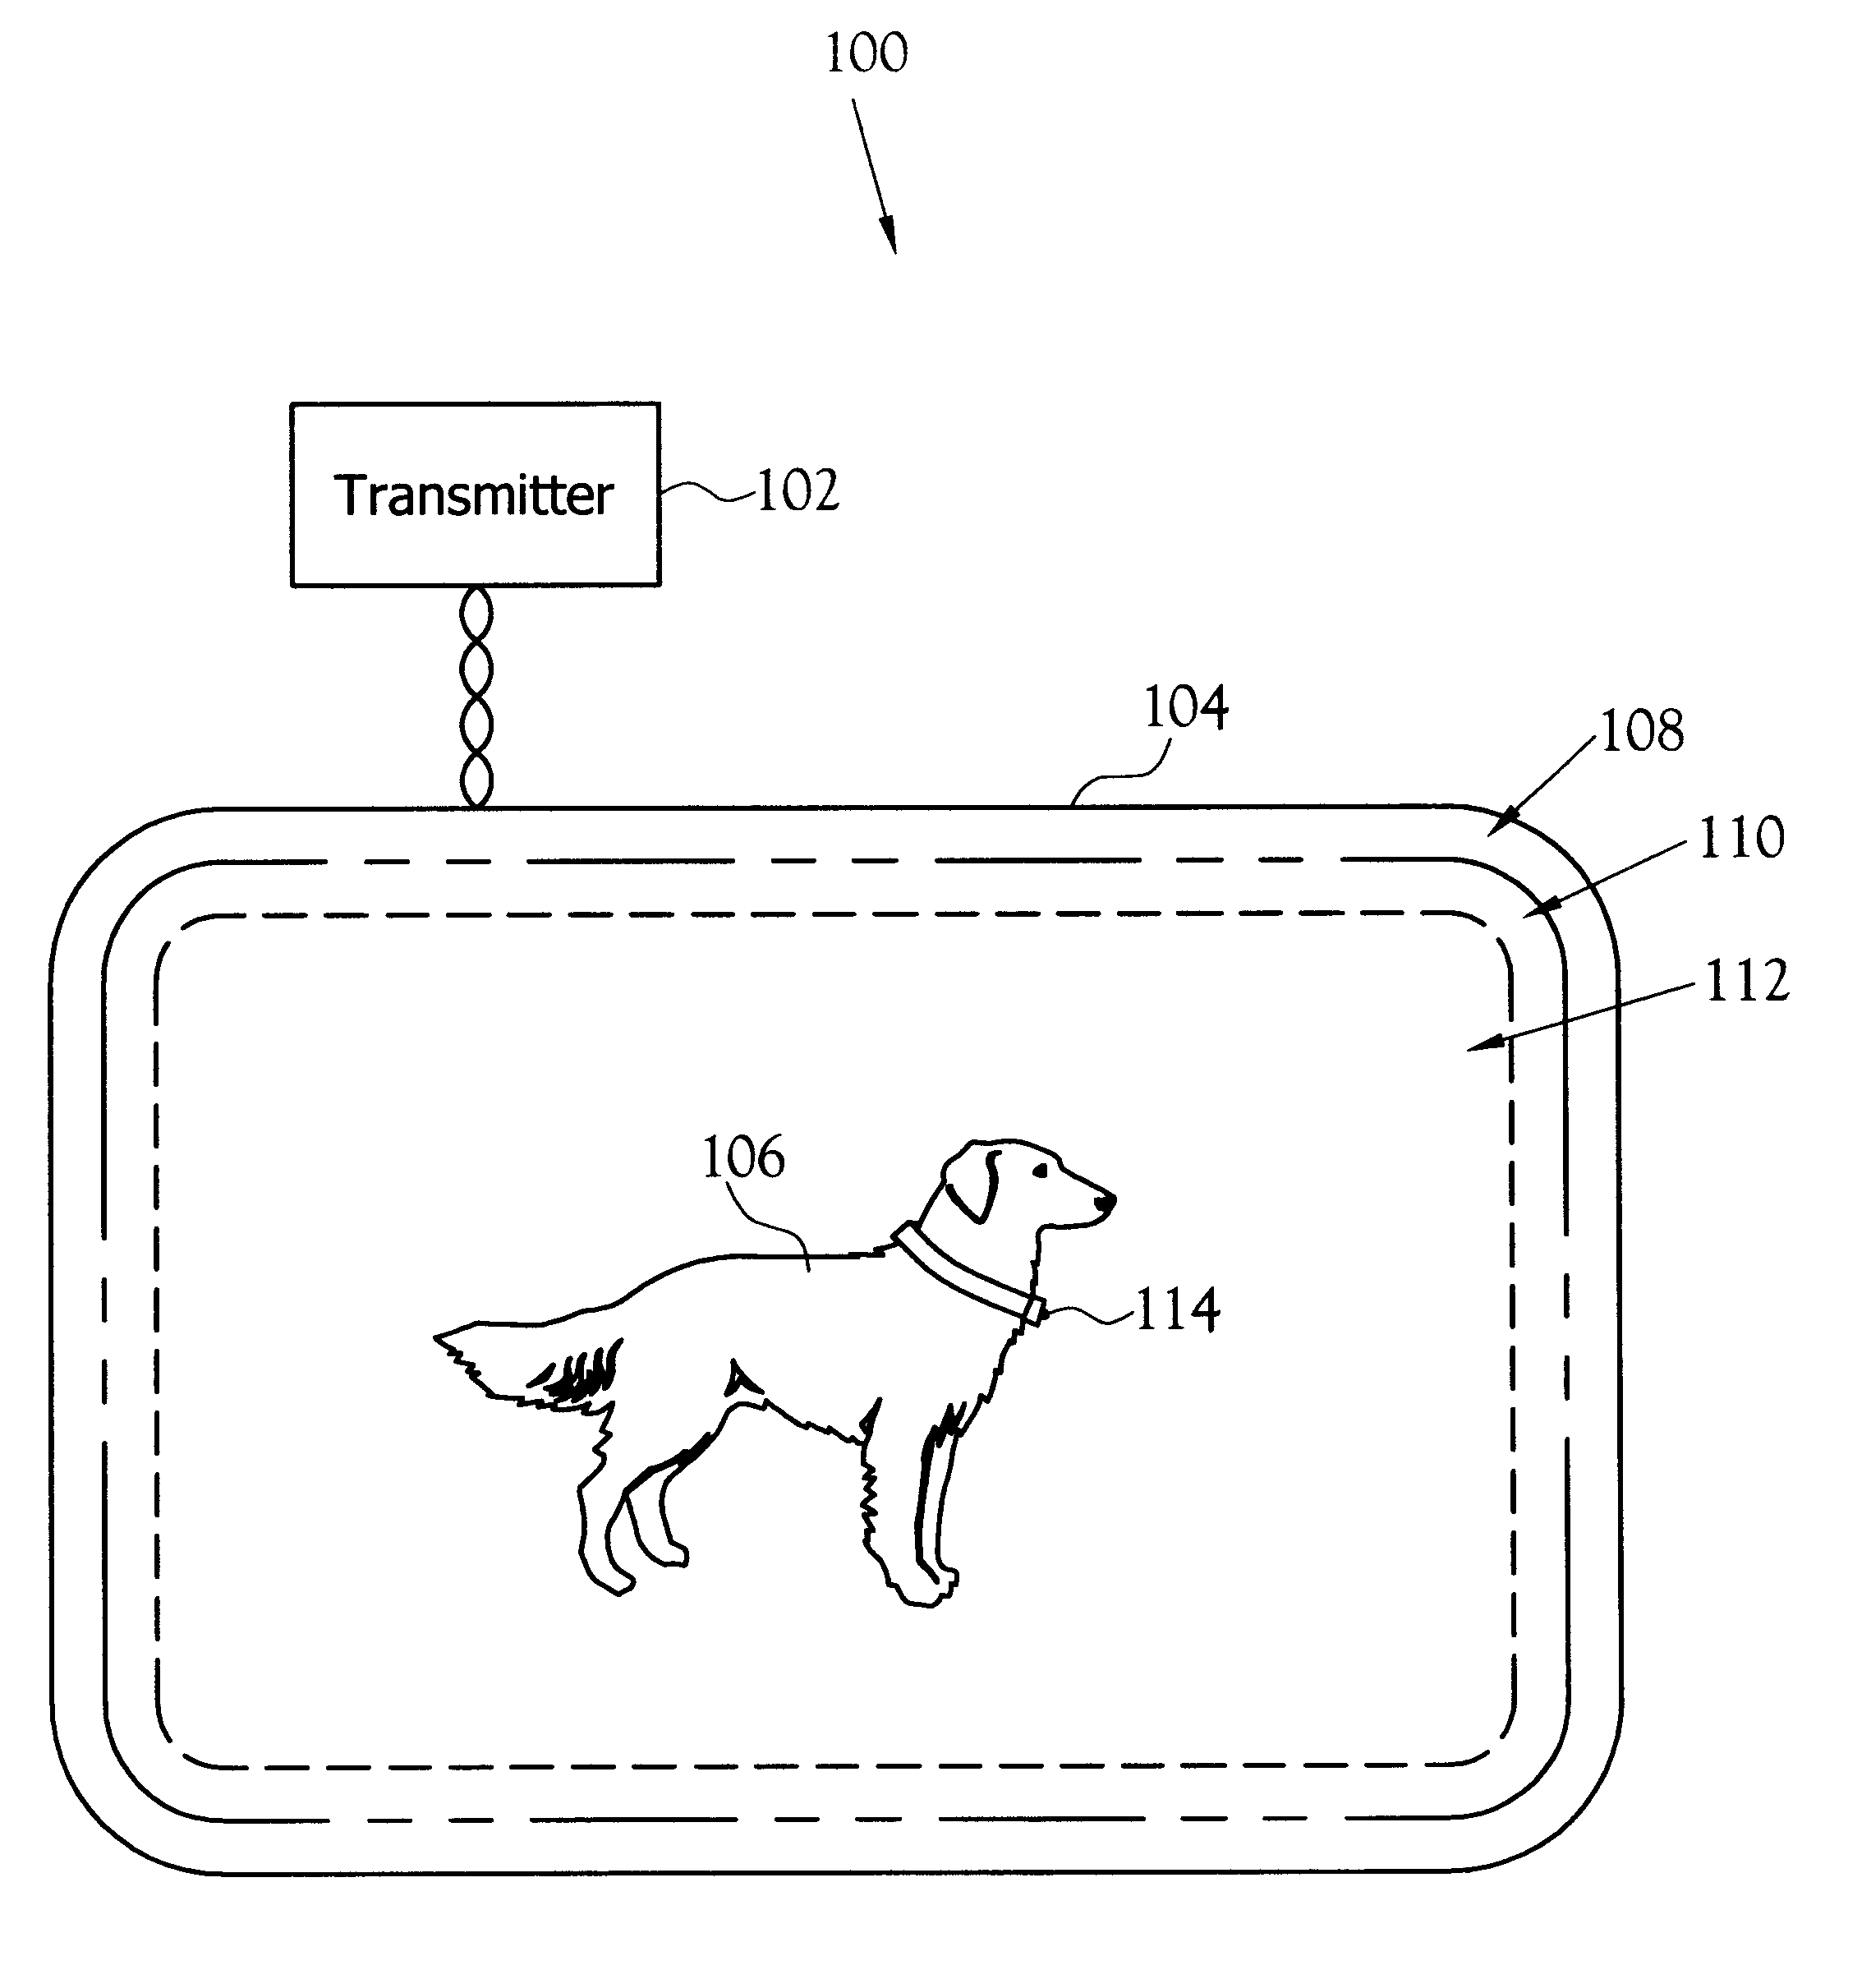 Method and apparatus for testing an electronic pet containment transmitter